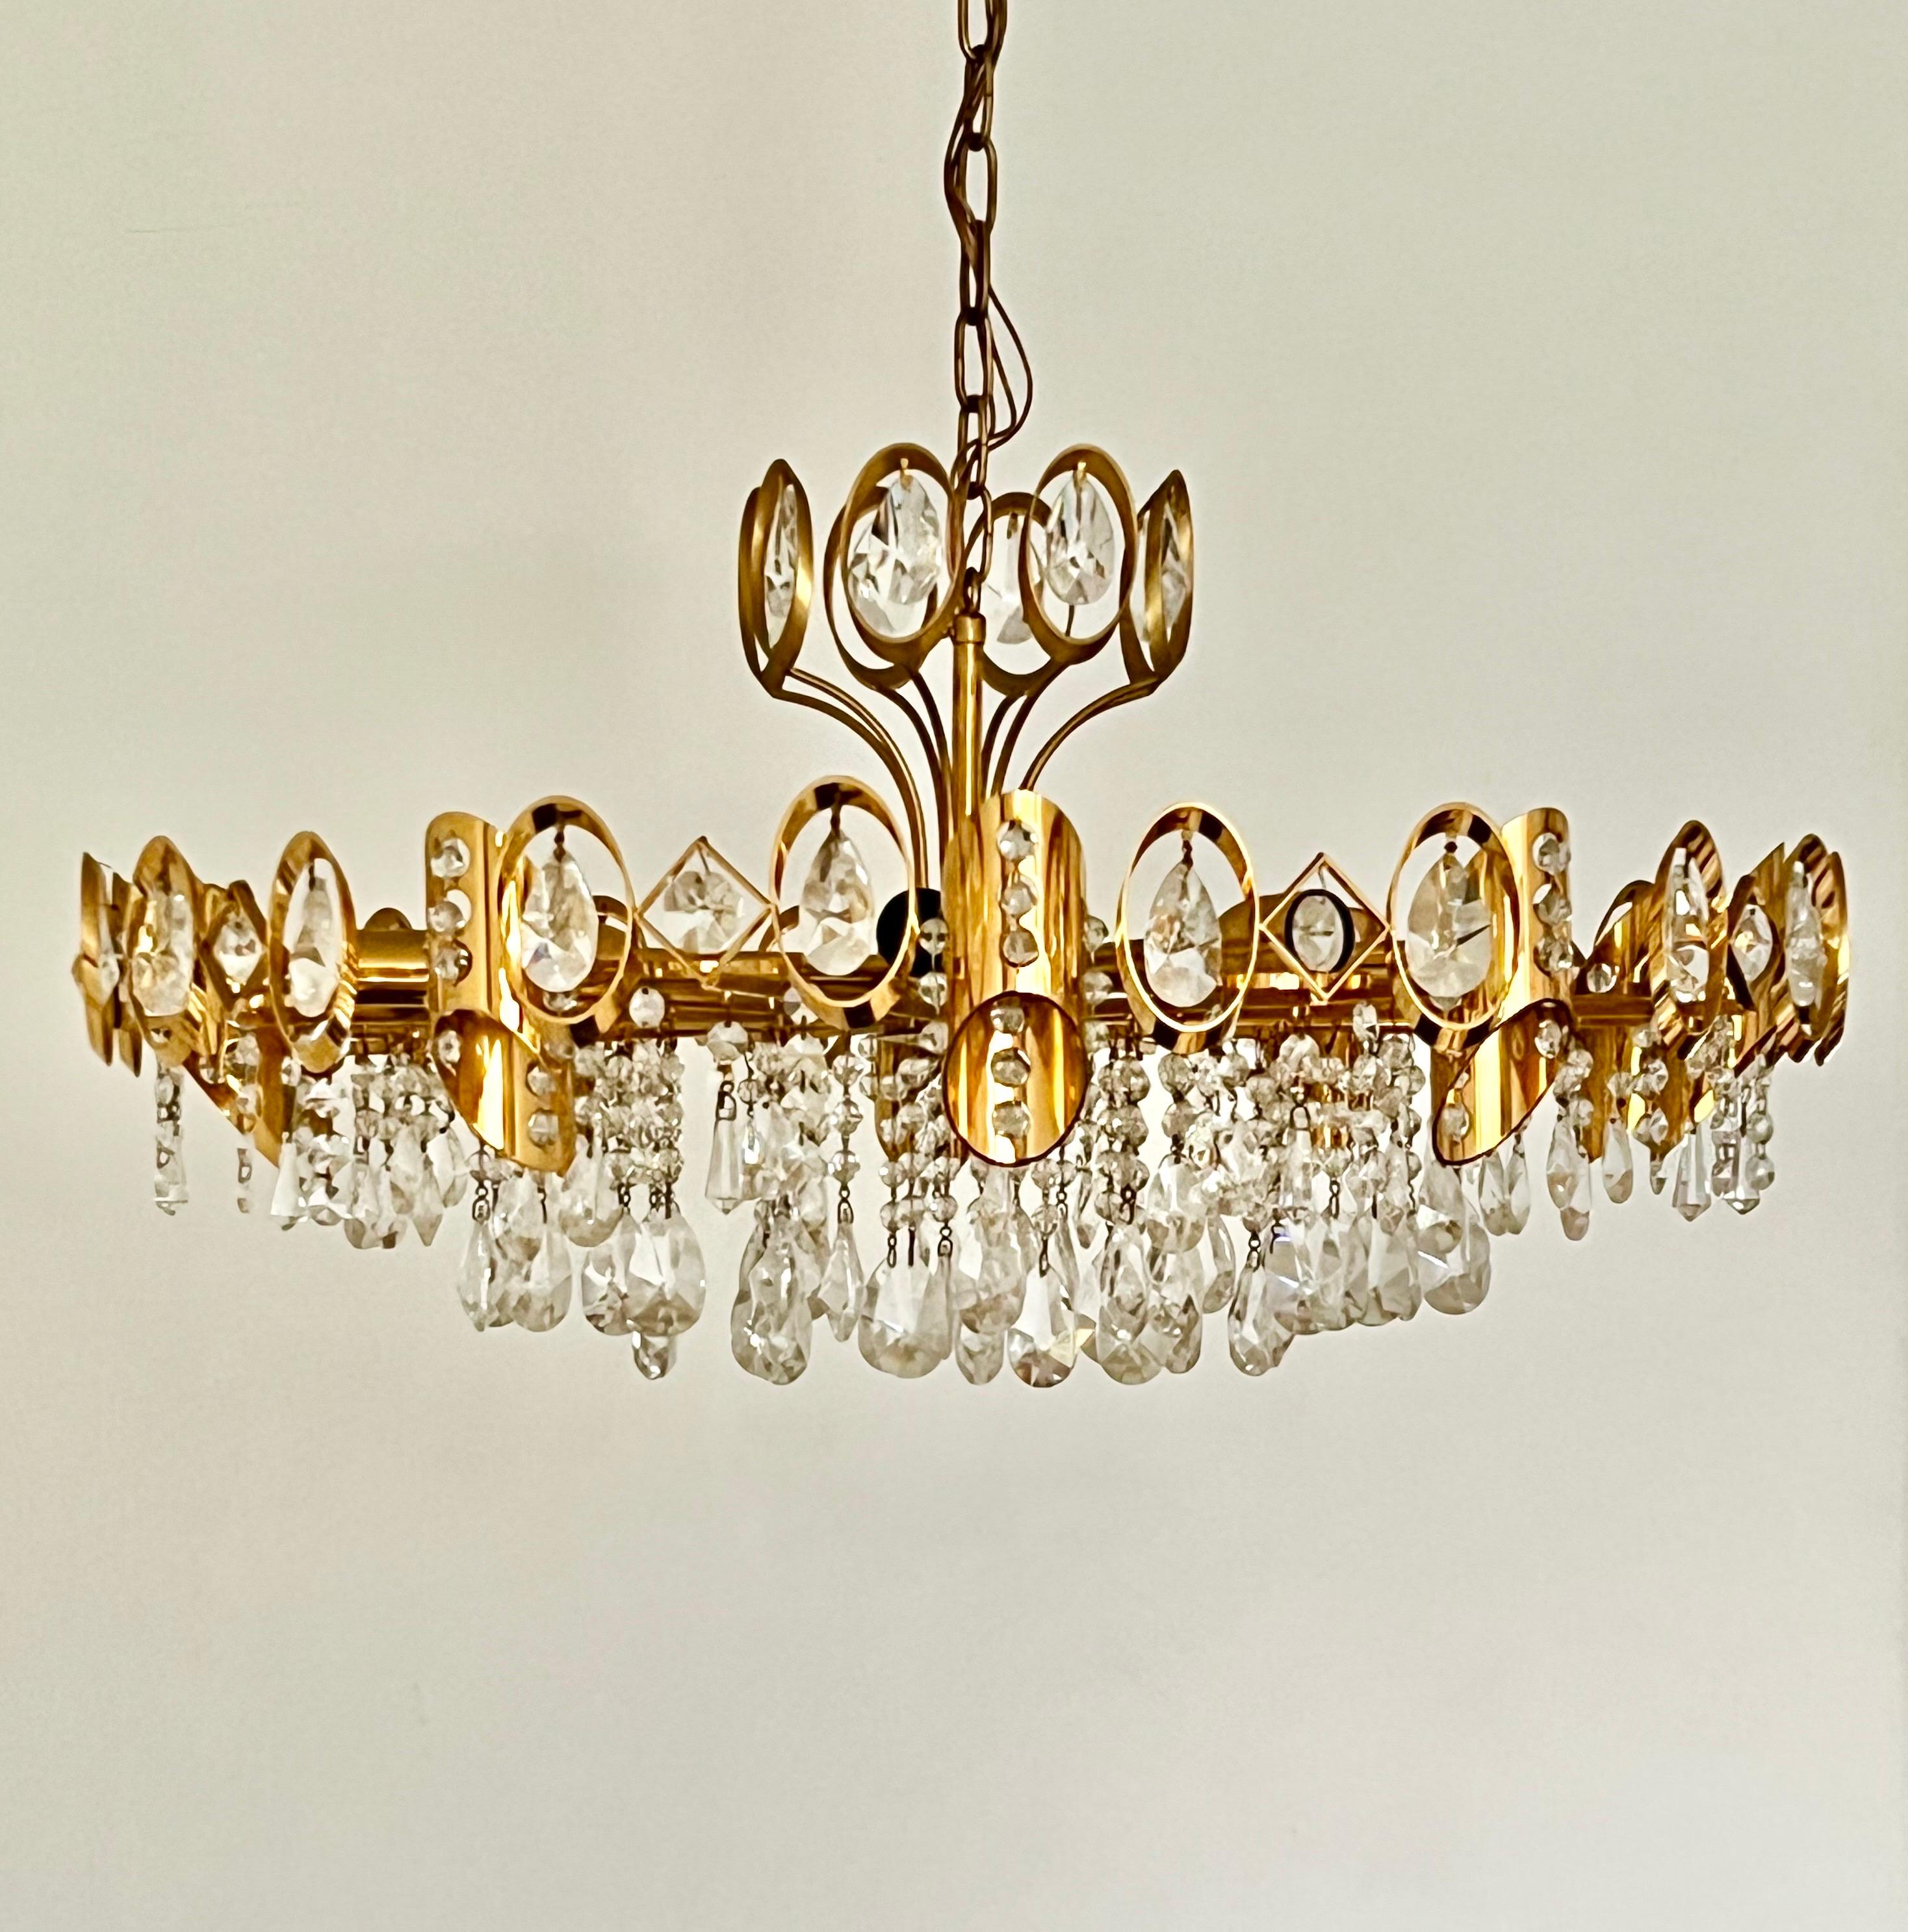 A large gilt-brass chandelier covered in crystal glass droplets, attributed to Palwa. Mid-20th Century, Austria.

A glamorous and very nicely engineered chandelier of good size. The frame is built around ten lateral arms hanging on a chain of